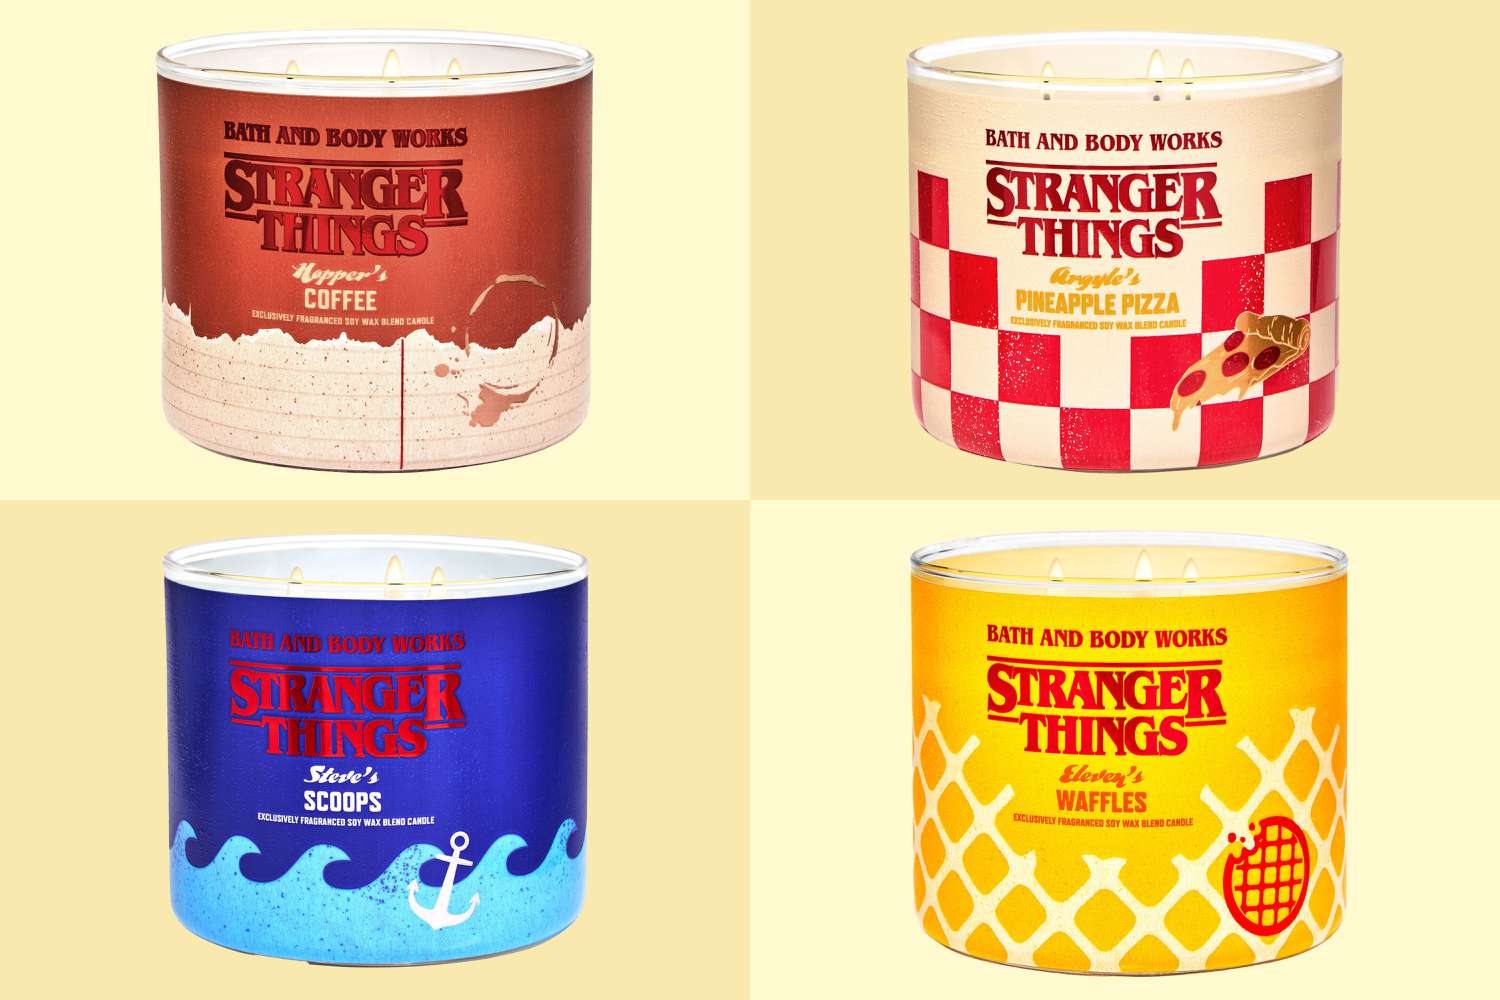 Bath & Body Works Dropped a Limited Edition Stranger Things Collab With Netflix